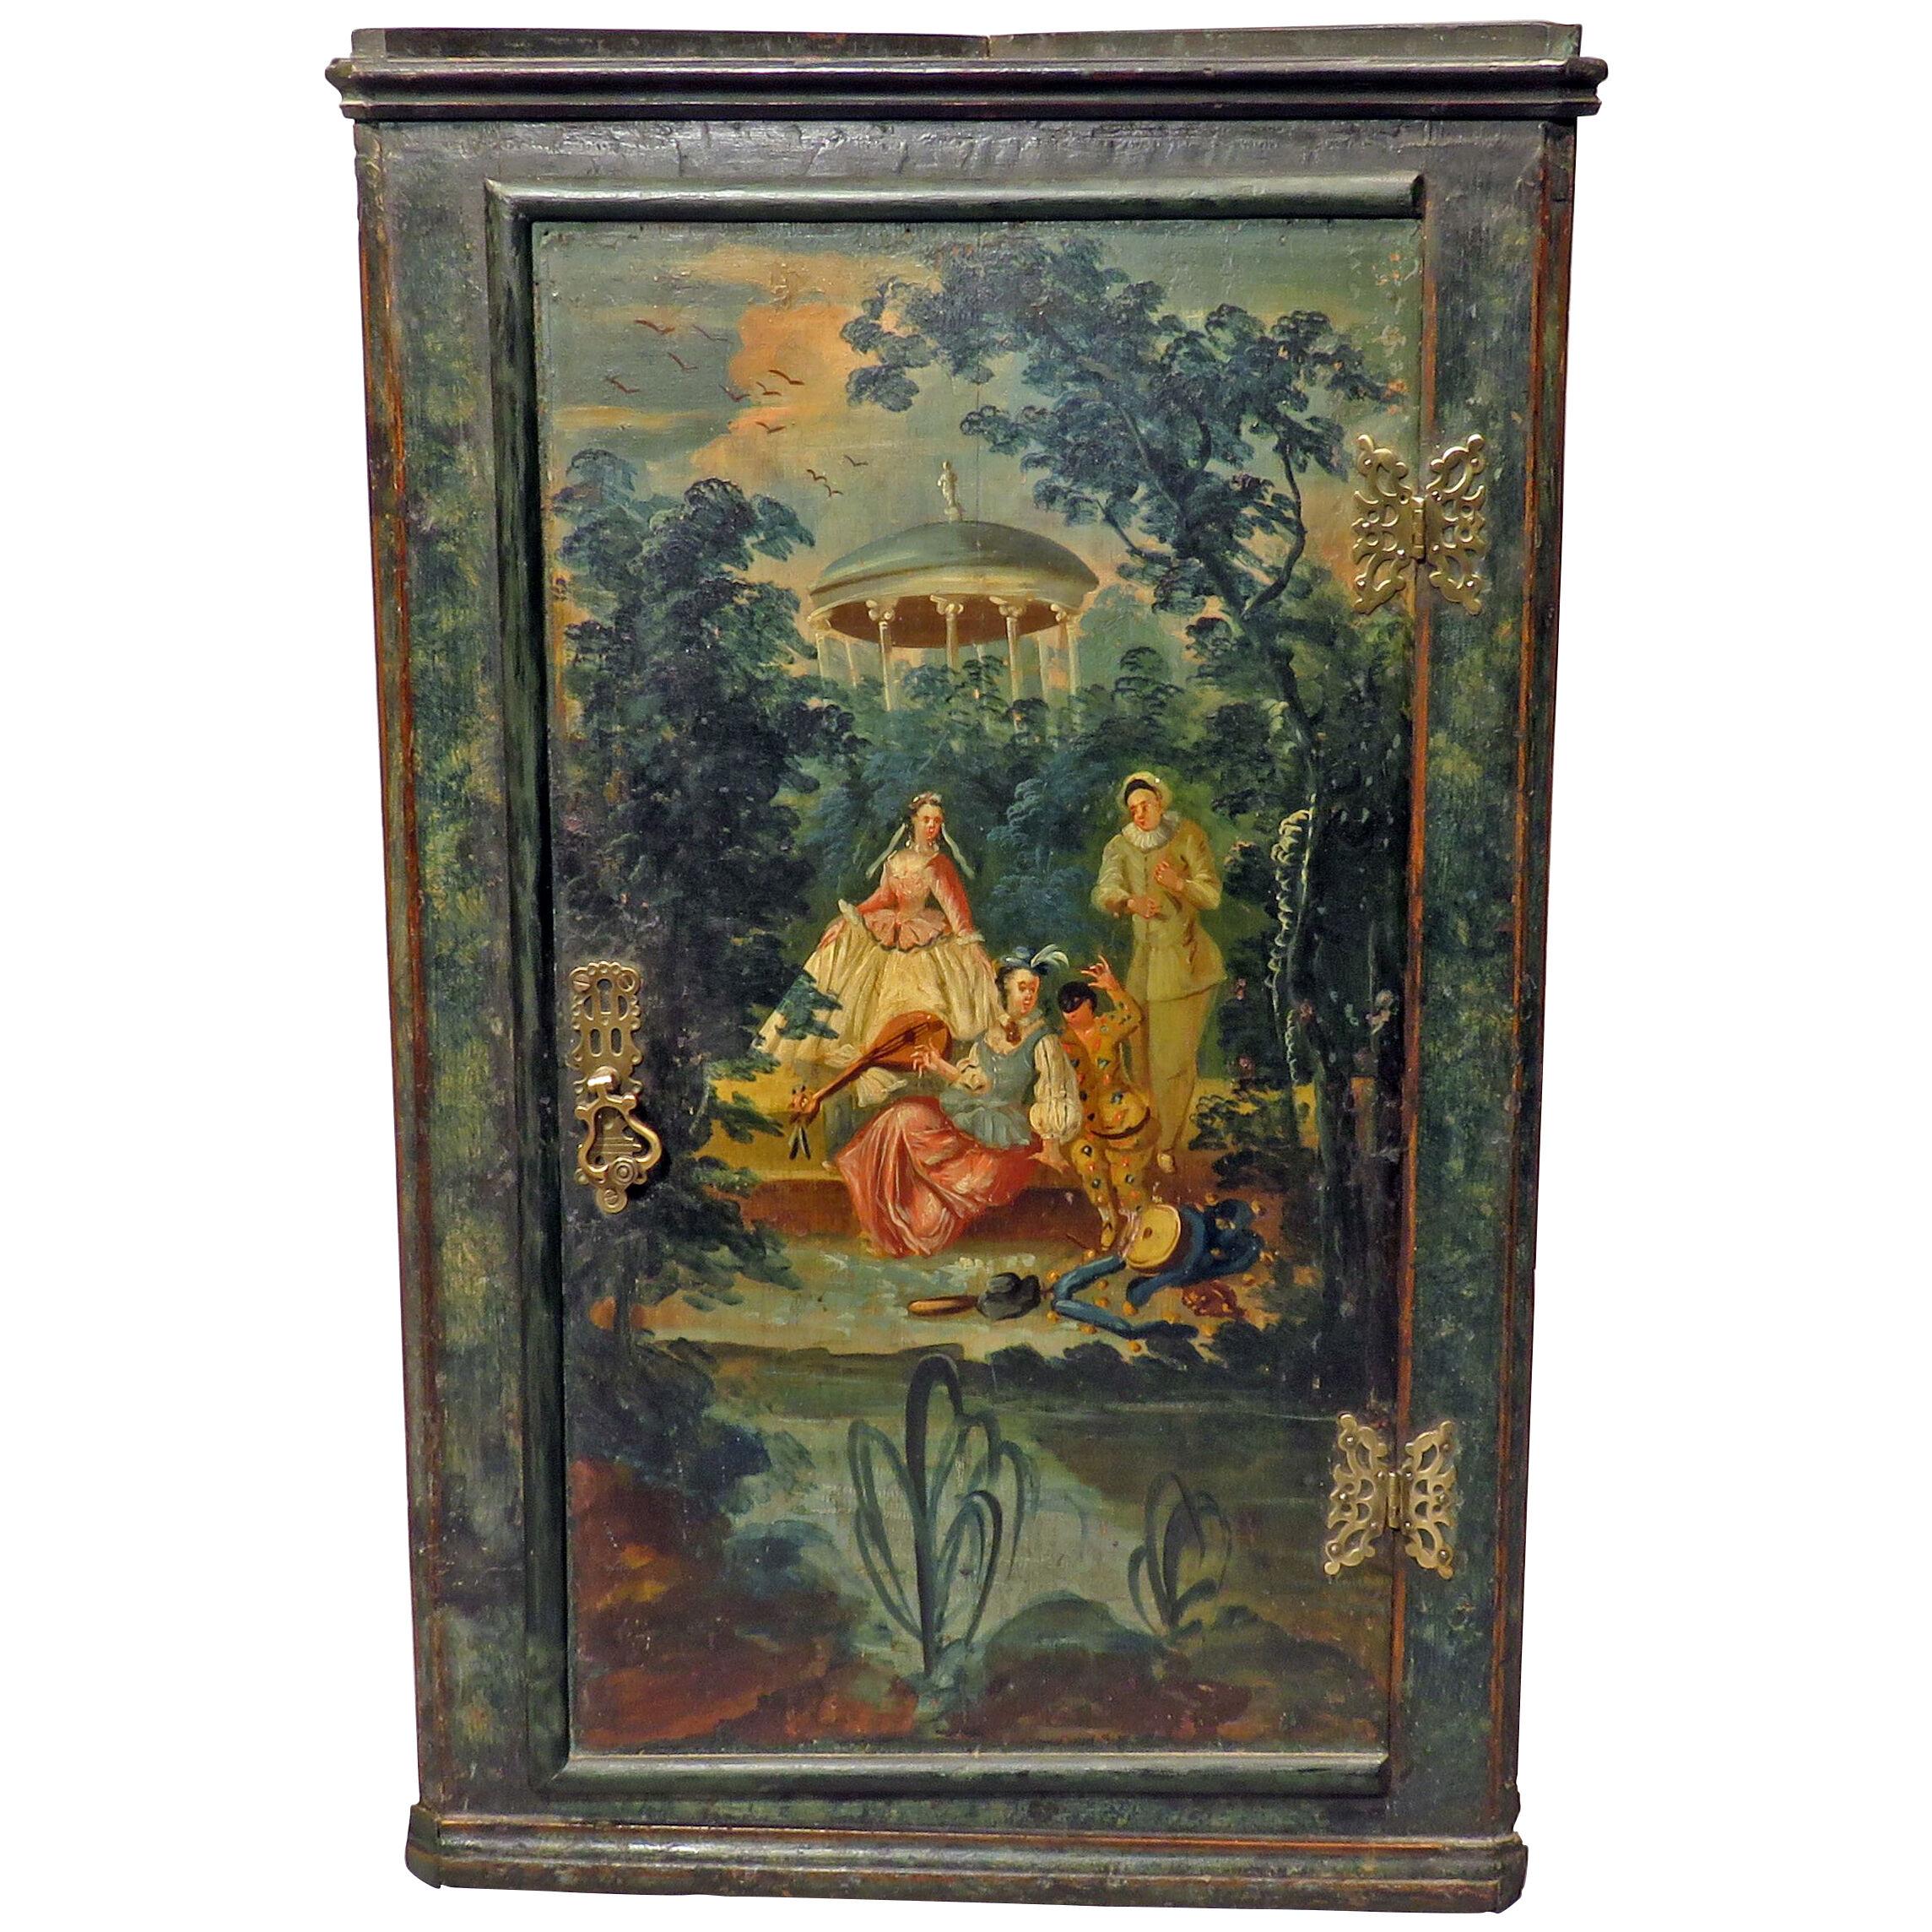 An Early 18th Century Painted Hanging Corner Cupboard